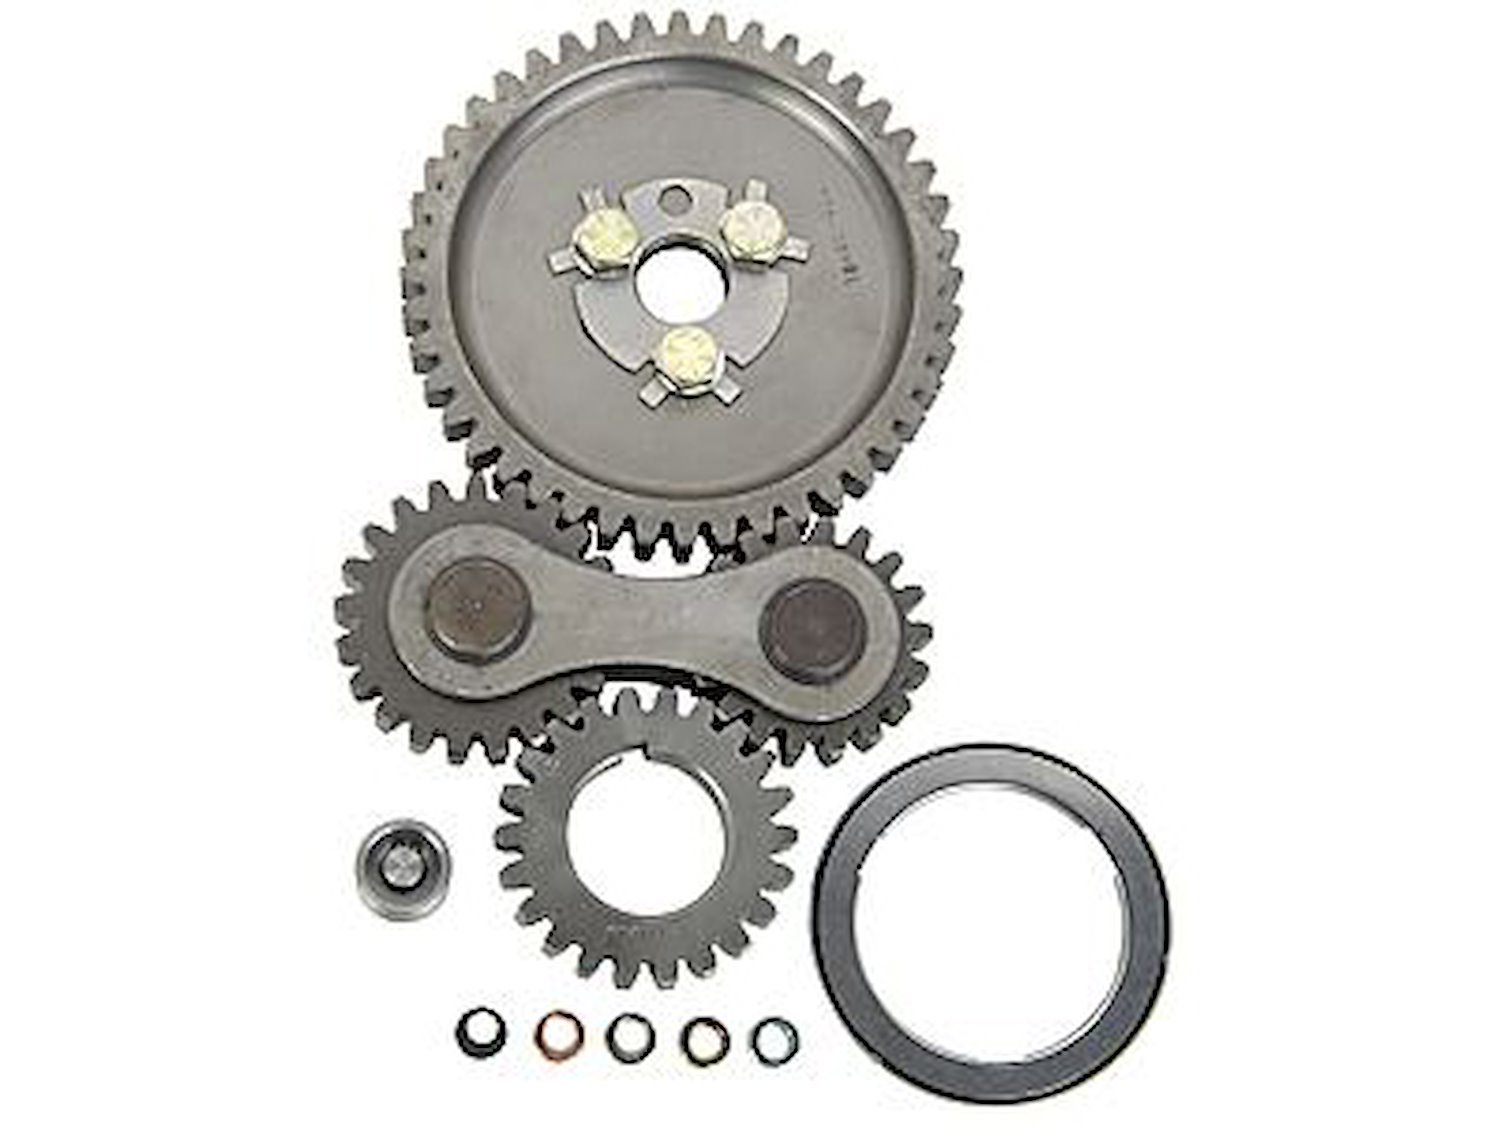 Quieter Performance Gear Drive 1955-92 Small Block Chevy